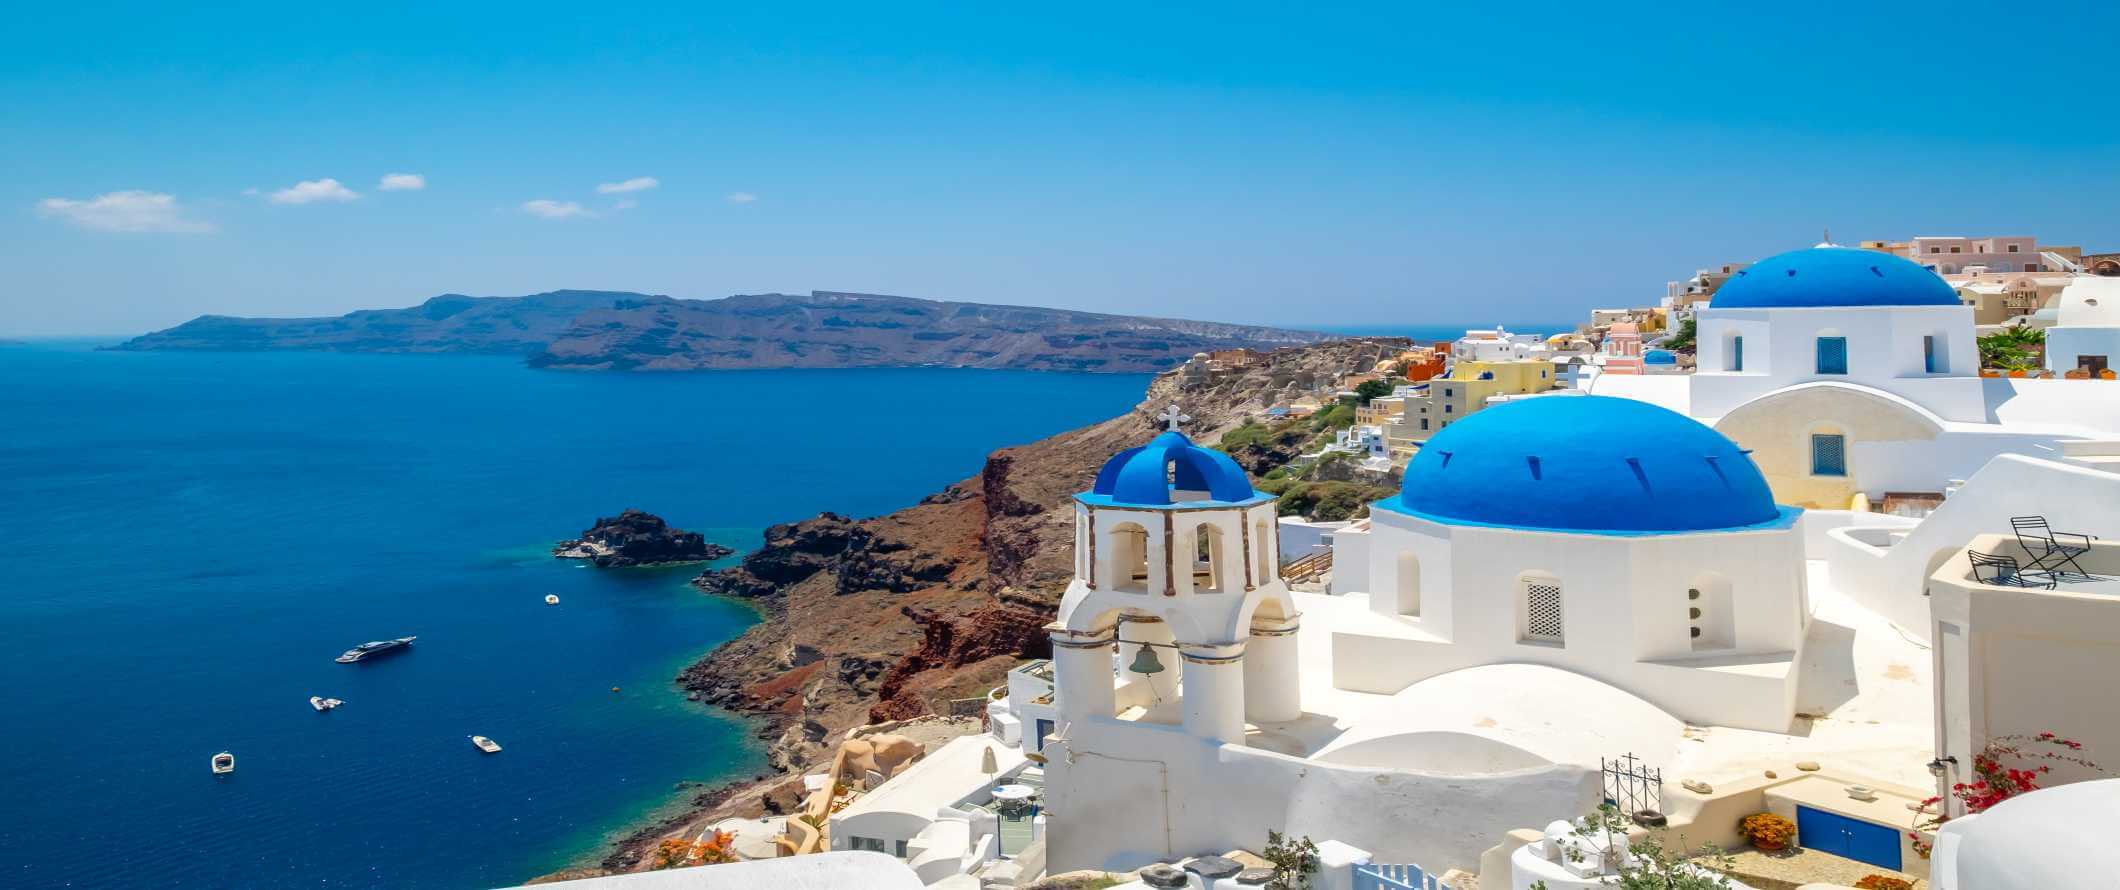 Visit Santorini: Top 17 Things To Do and Must-See Attractions